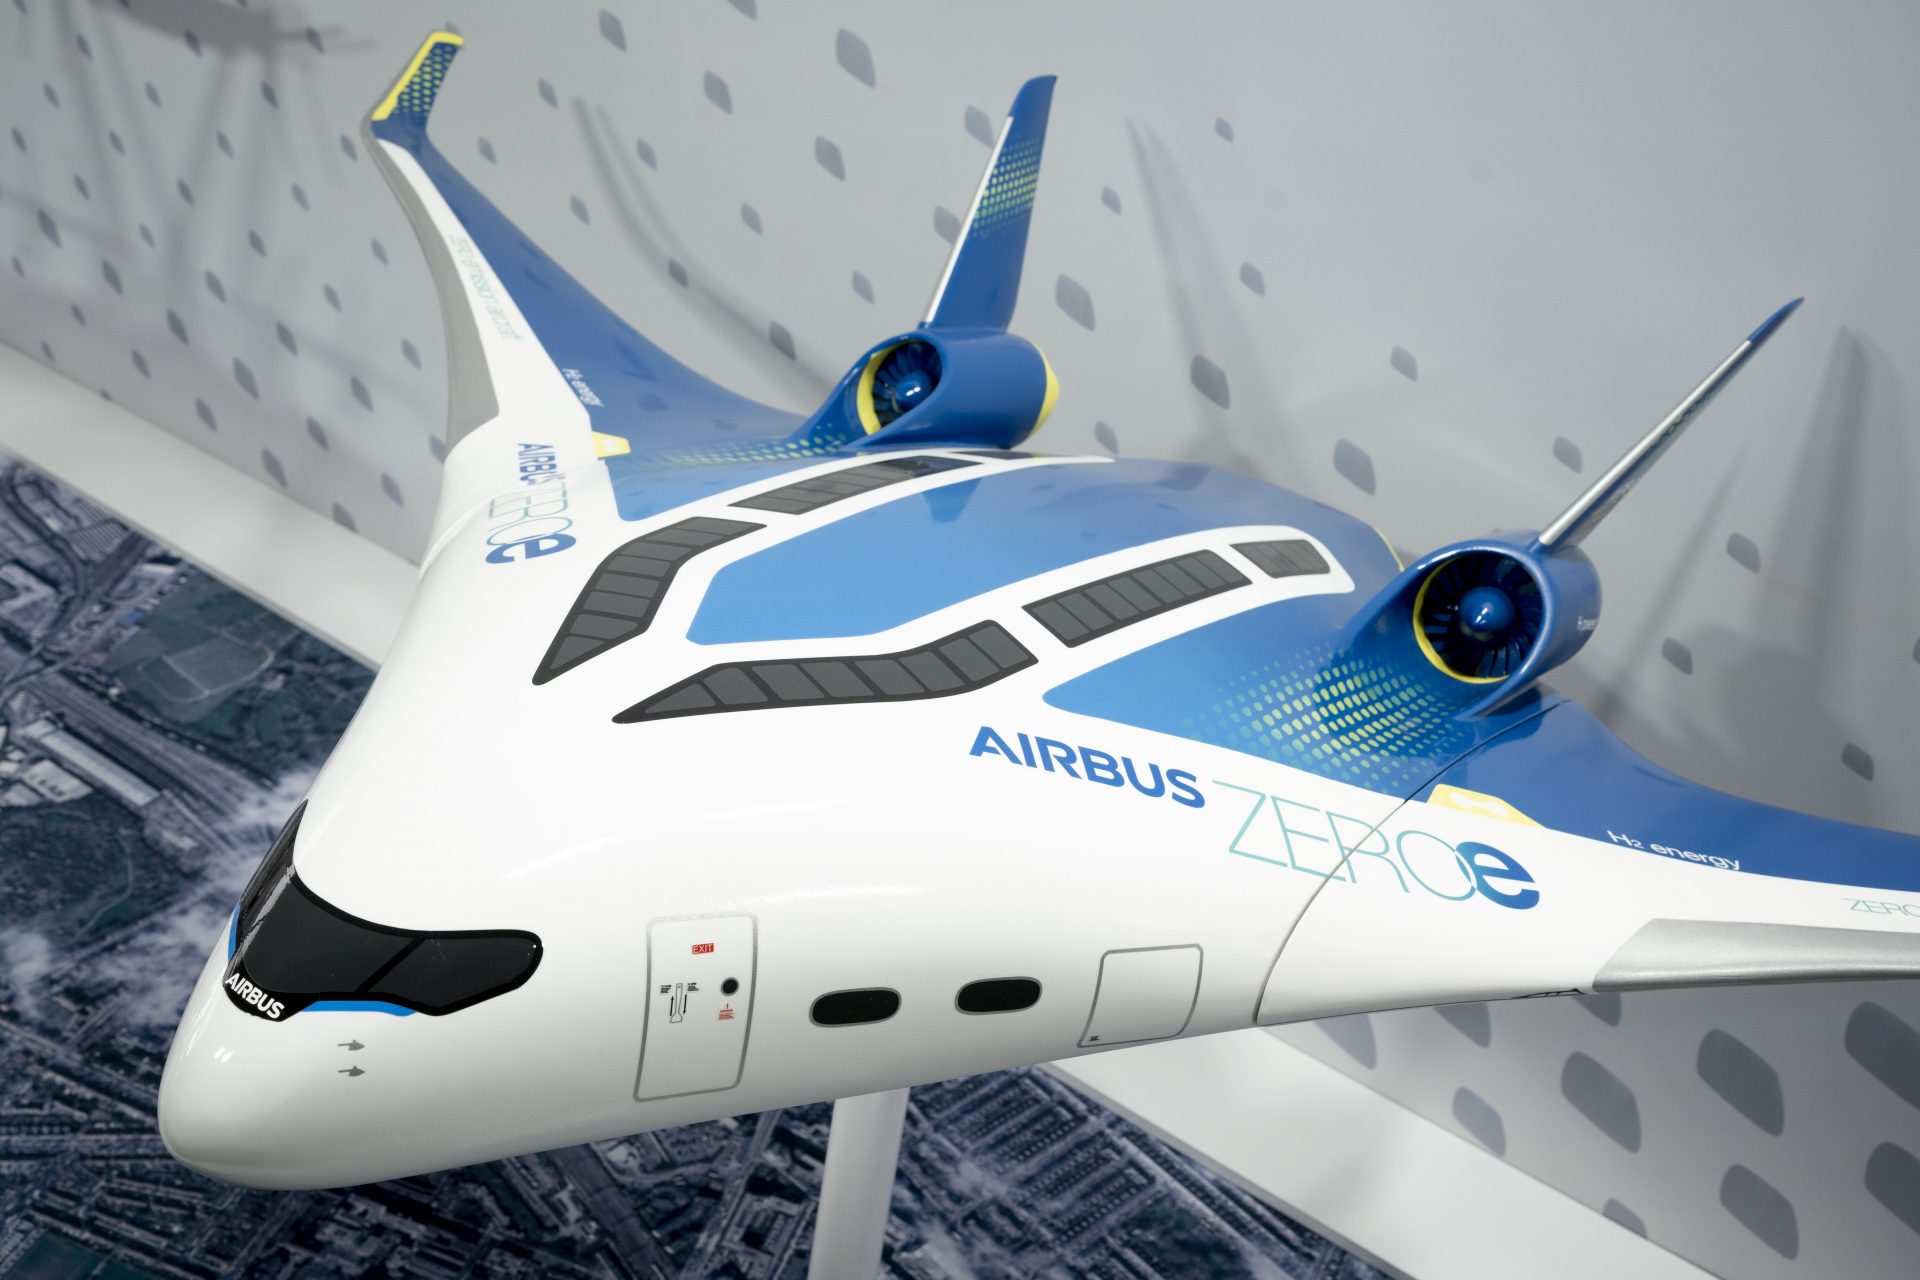 Boeing and Airbus are experimenting with blended-wing design